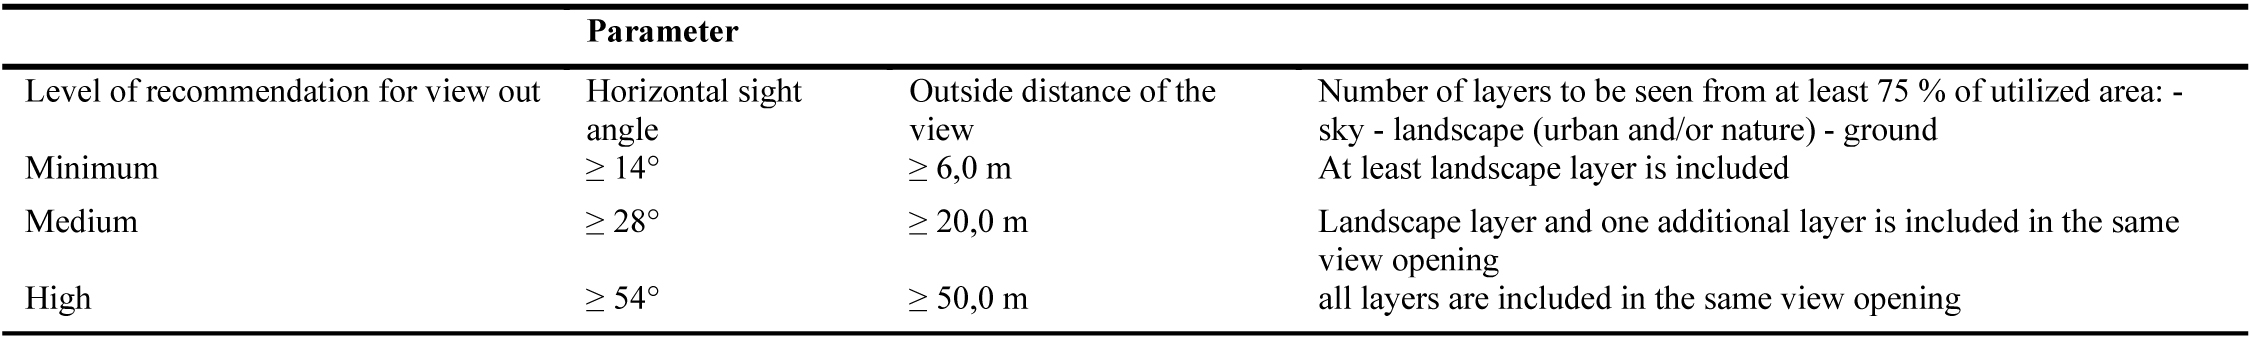 Assessment of the view outwards from a given position in an interior, collected from EN-17037.